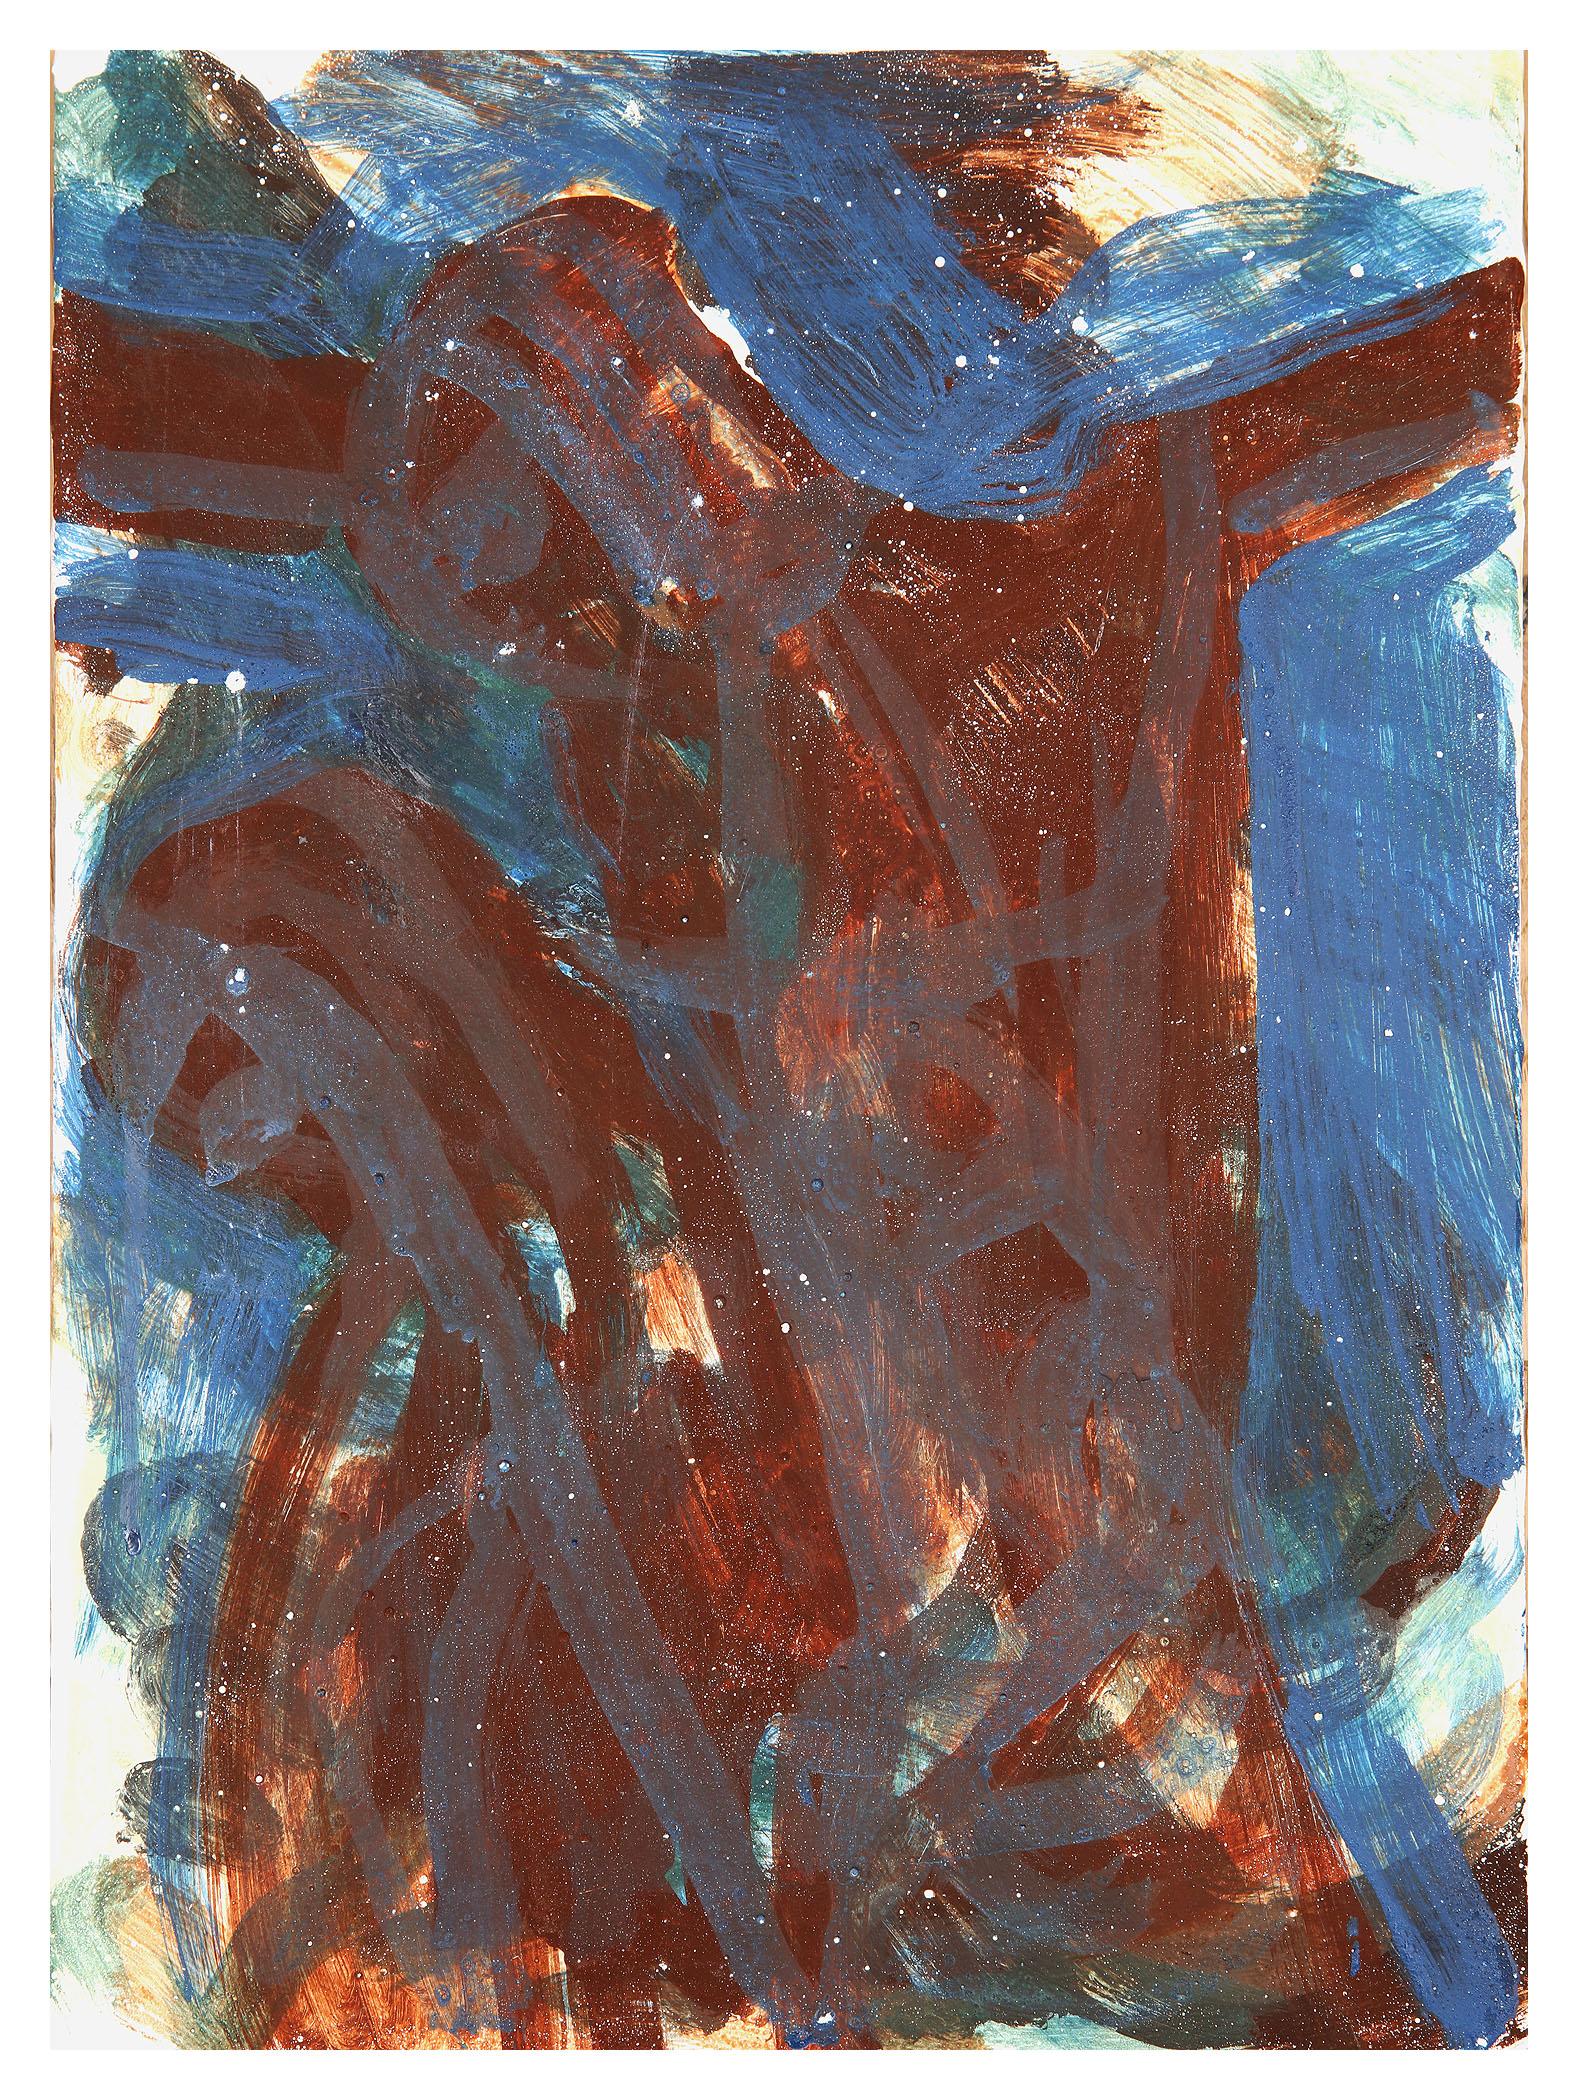 ZEBEDEE JONES Abstract Painting - 'CRUCIFIXION', 2015 Egg tempera on gesso board Signed and dated verso 35 x 25 cm